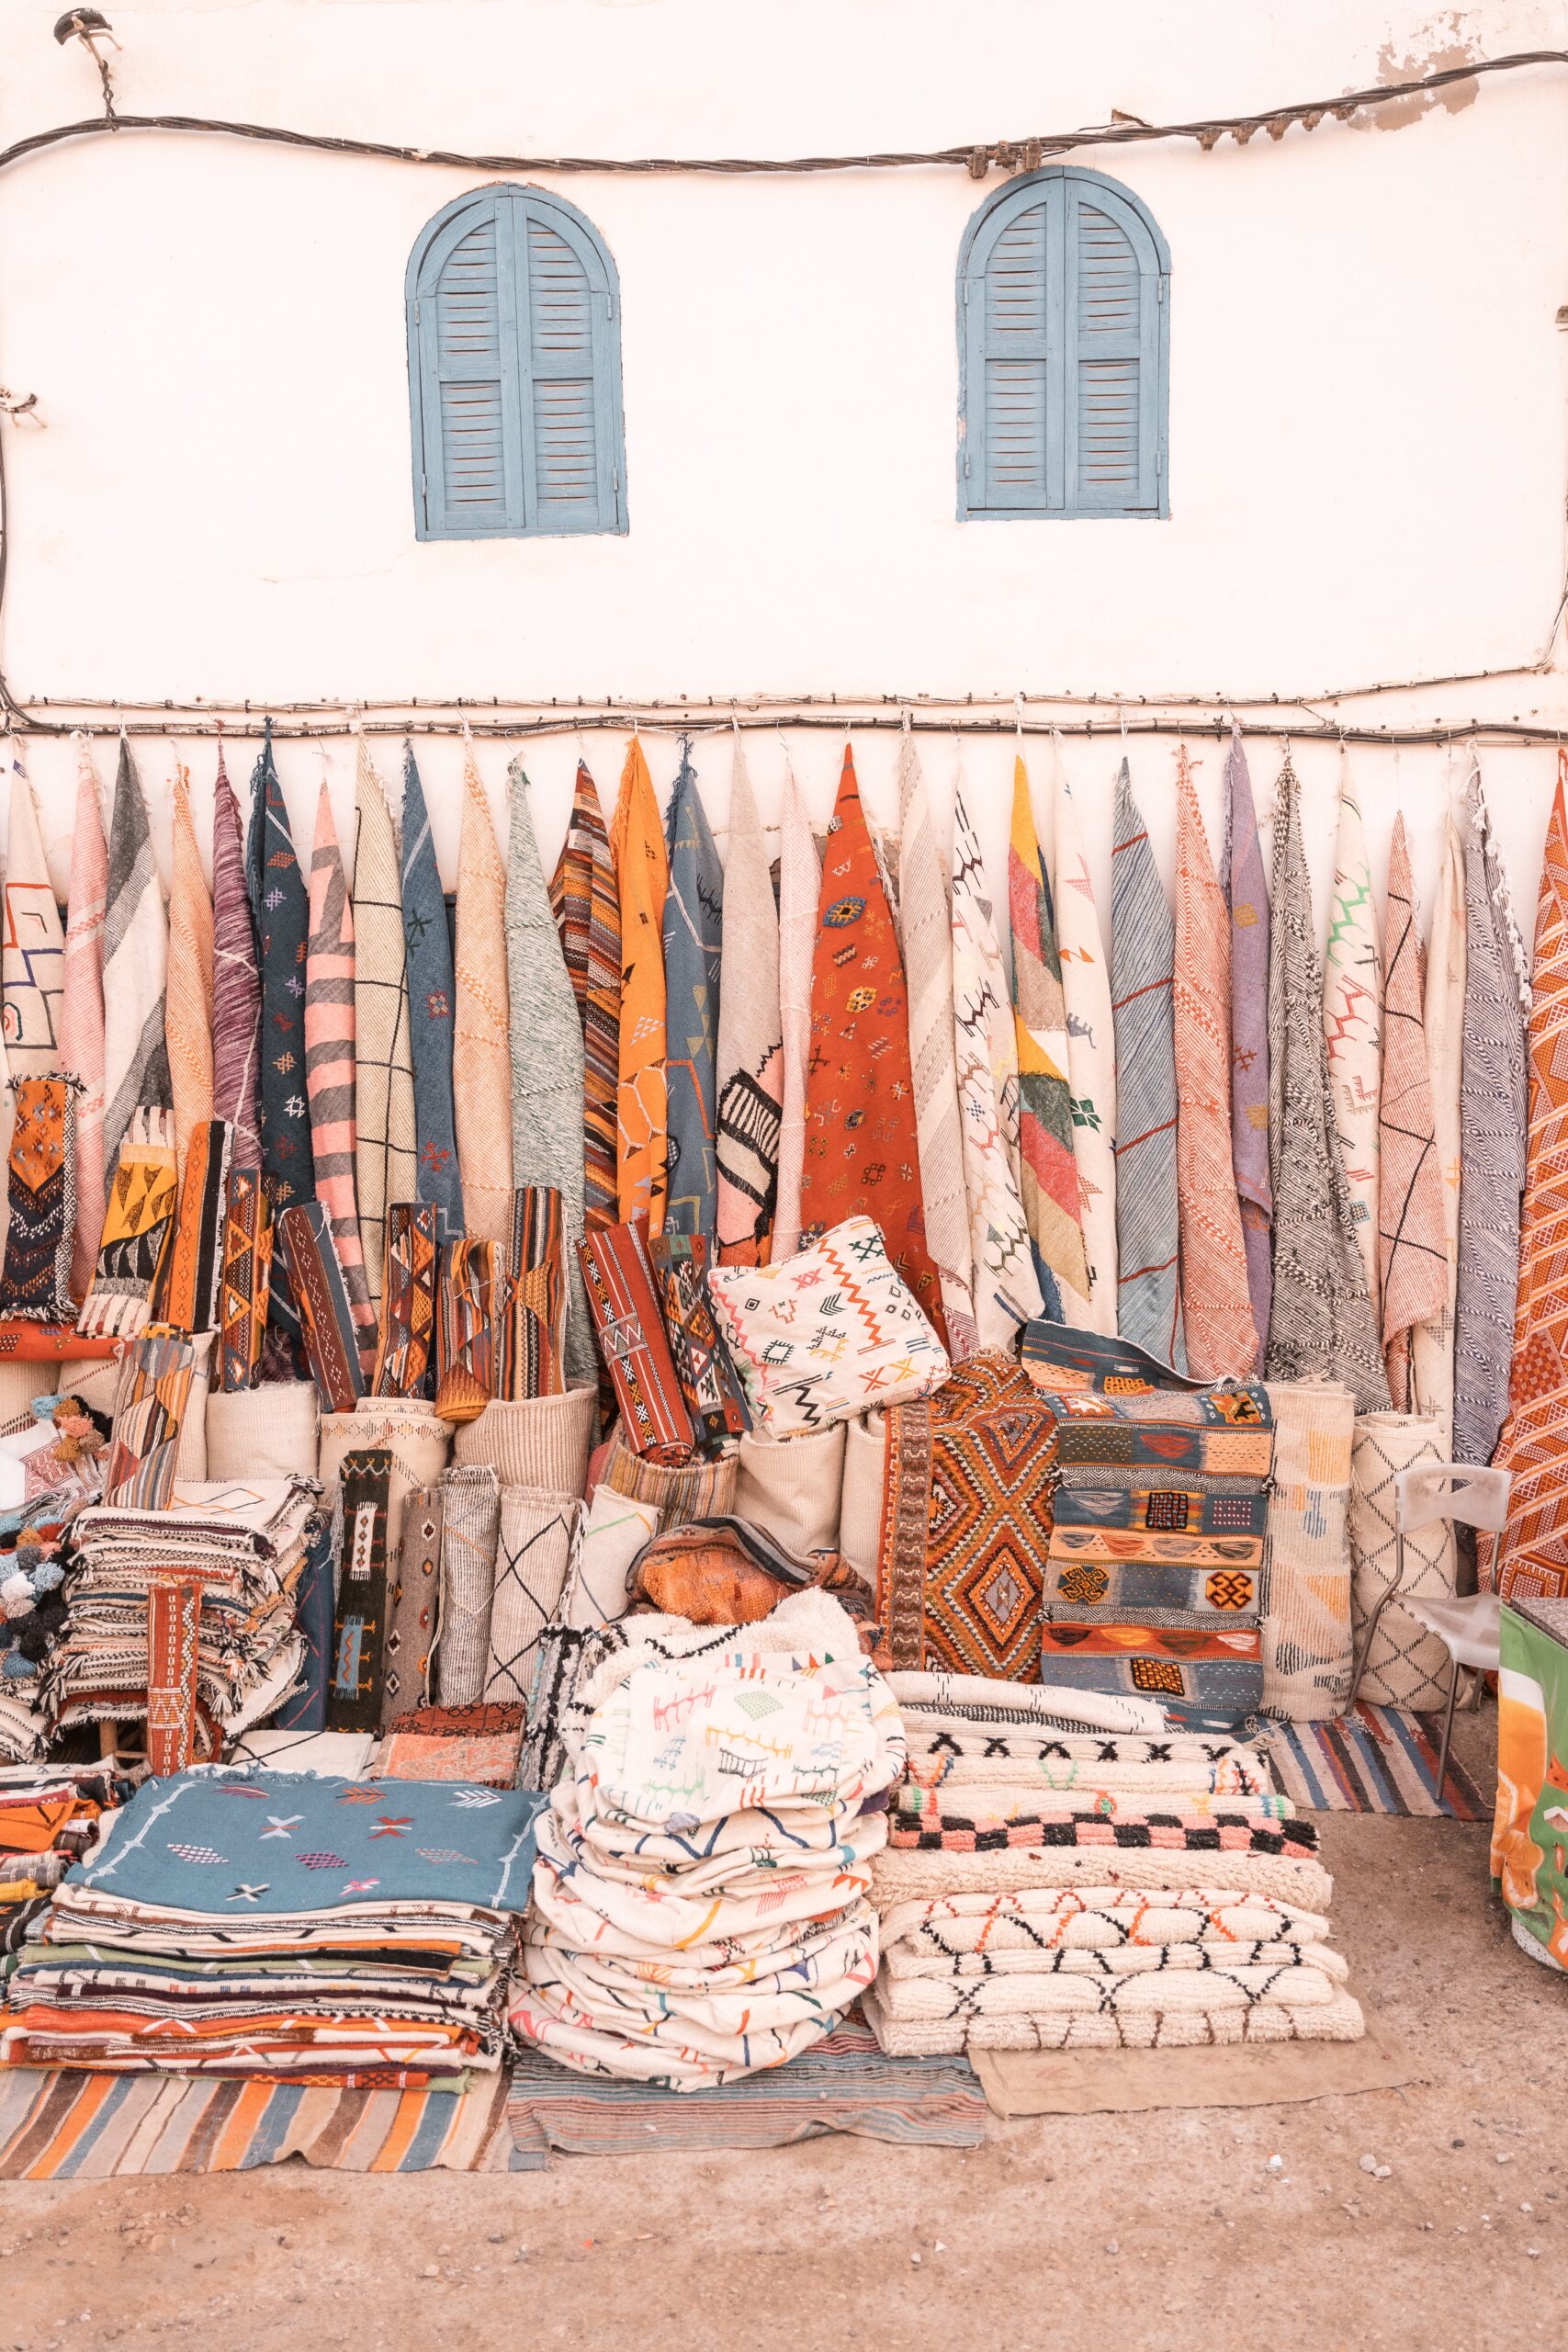 Handmade Moroccan carpets hanged on a white wall with two windows and a piles of handmade poufs and pillows put on the ground, reflecting the beauty of Moroccan handicraft